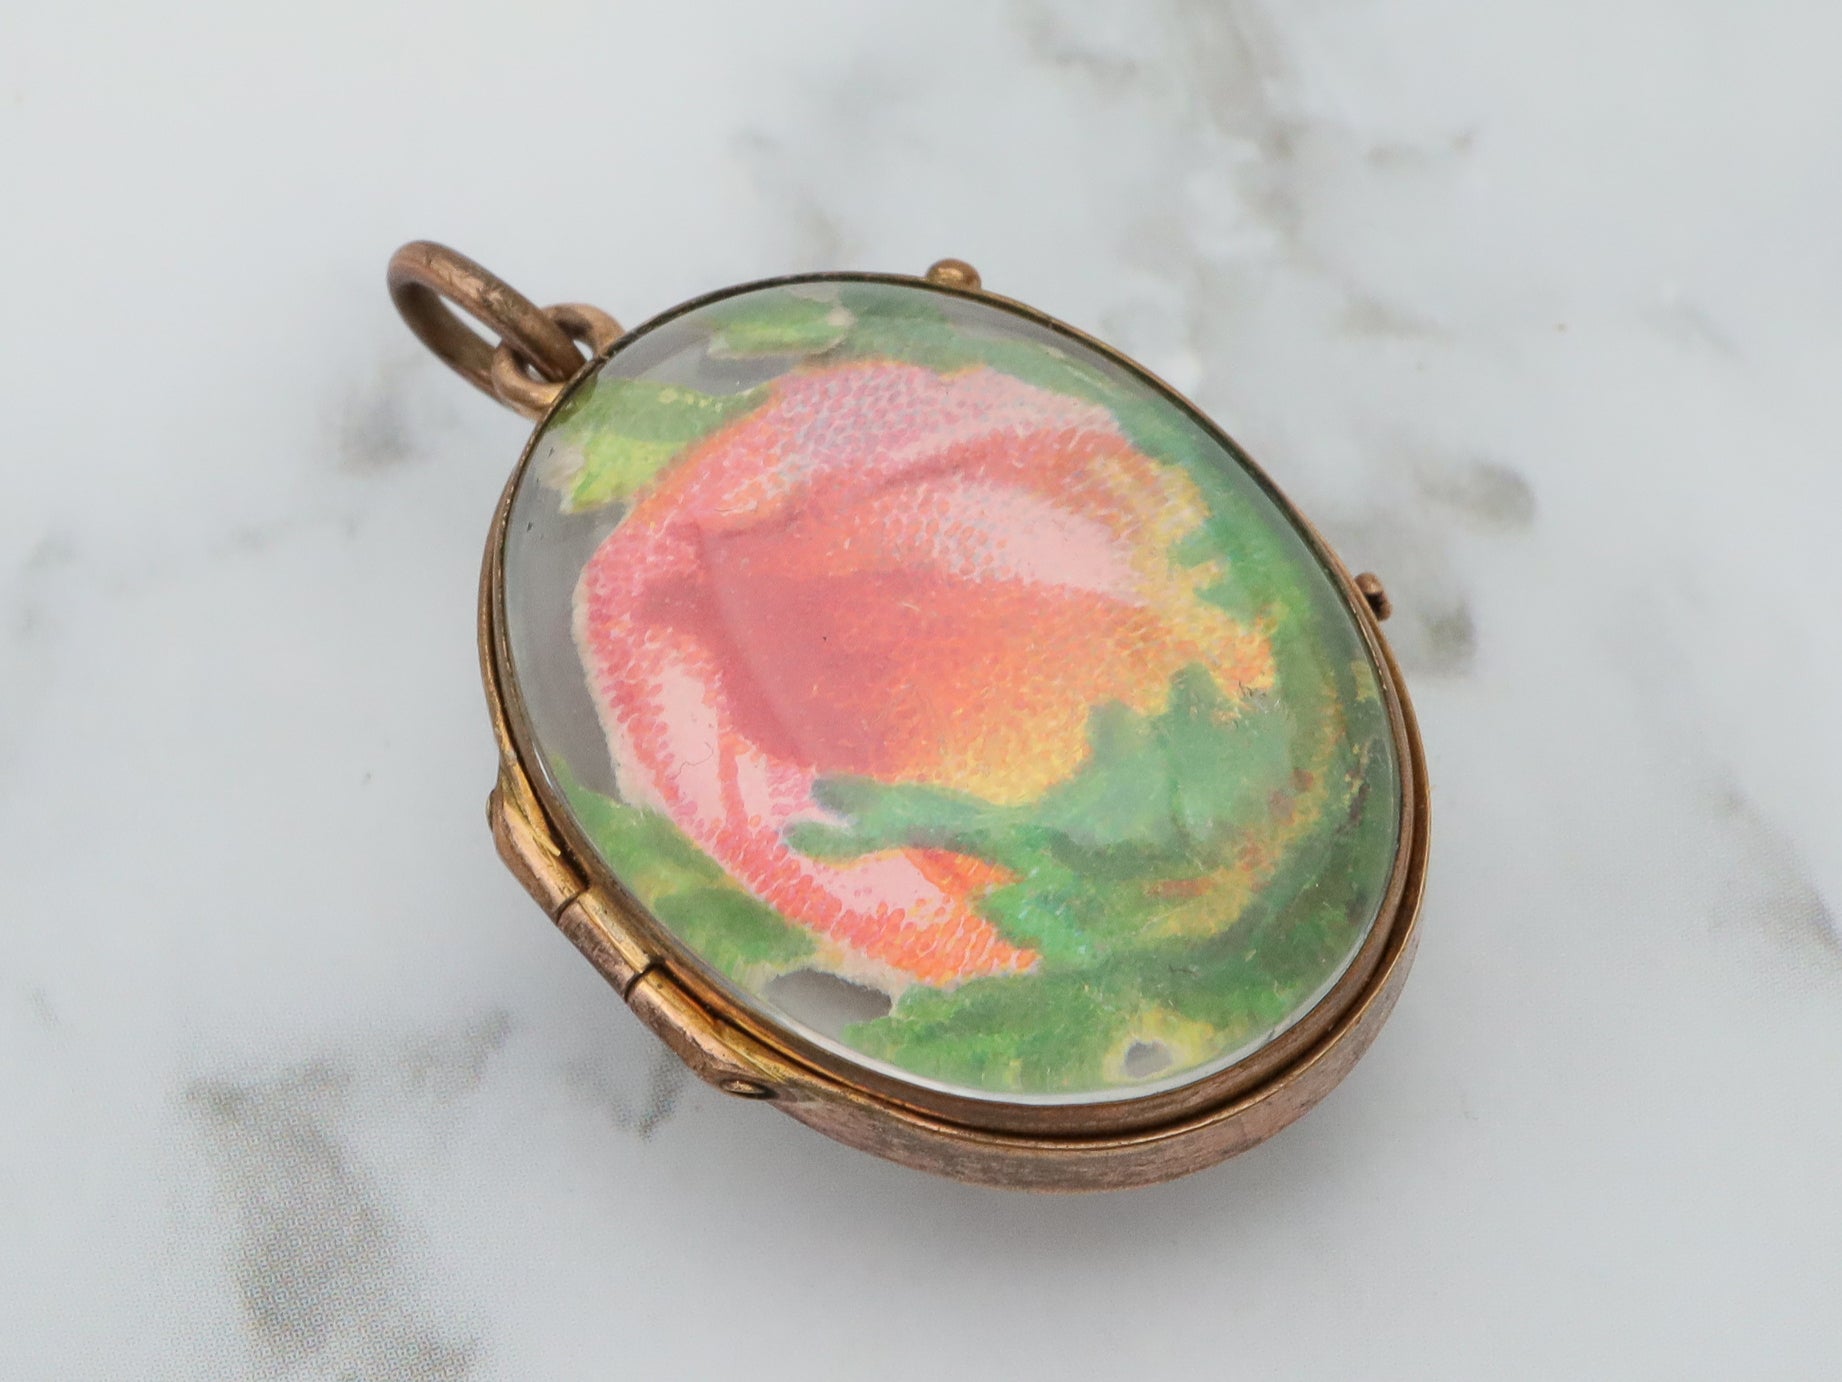 Antique Victorian gold filled glass dome locket pendant